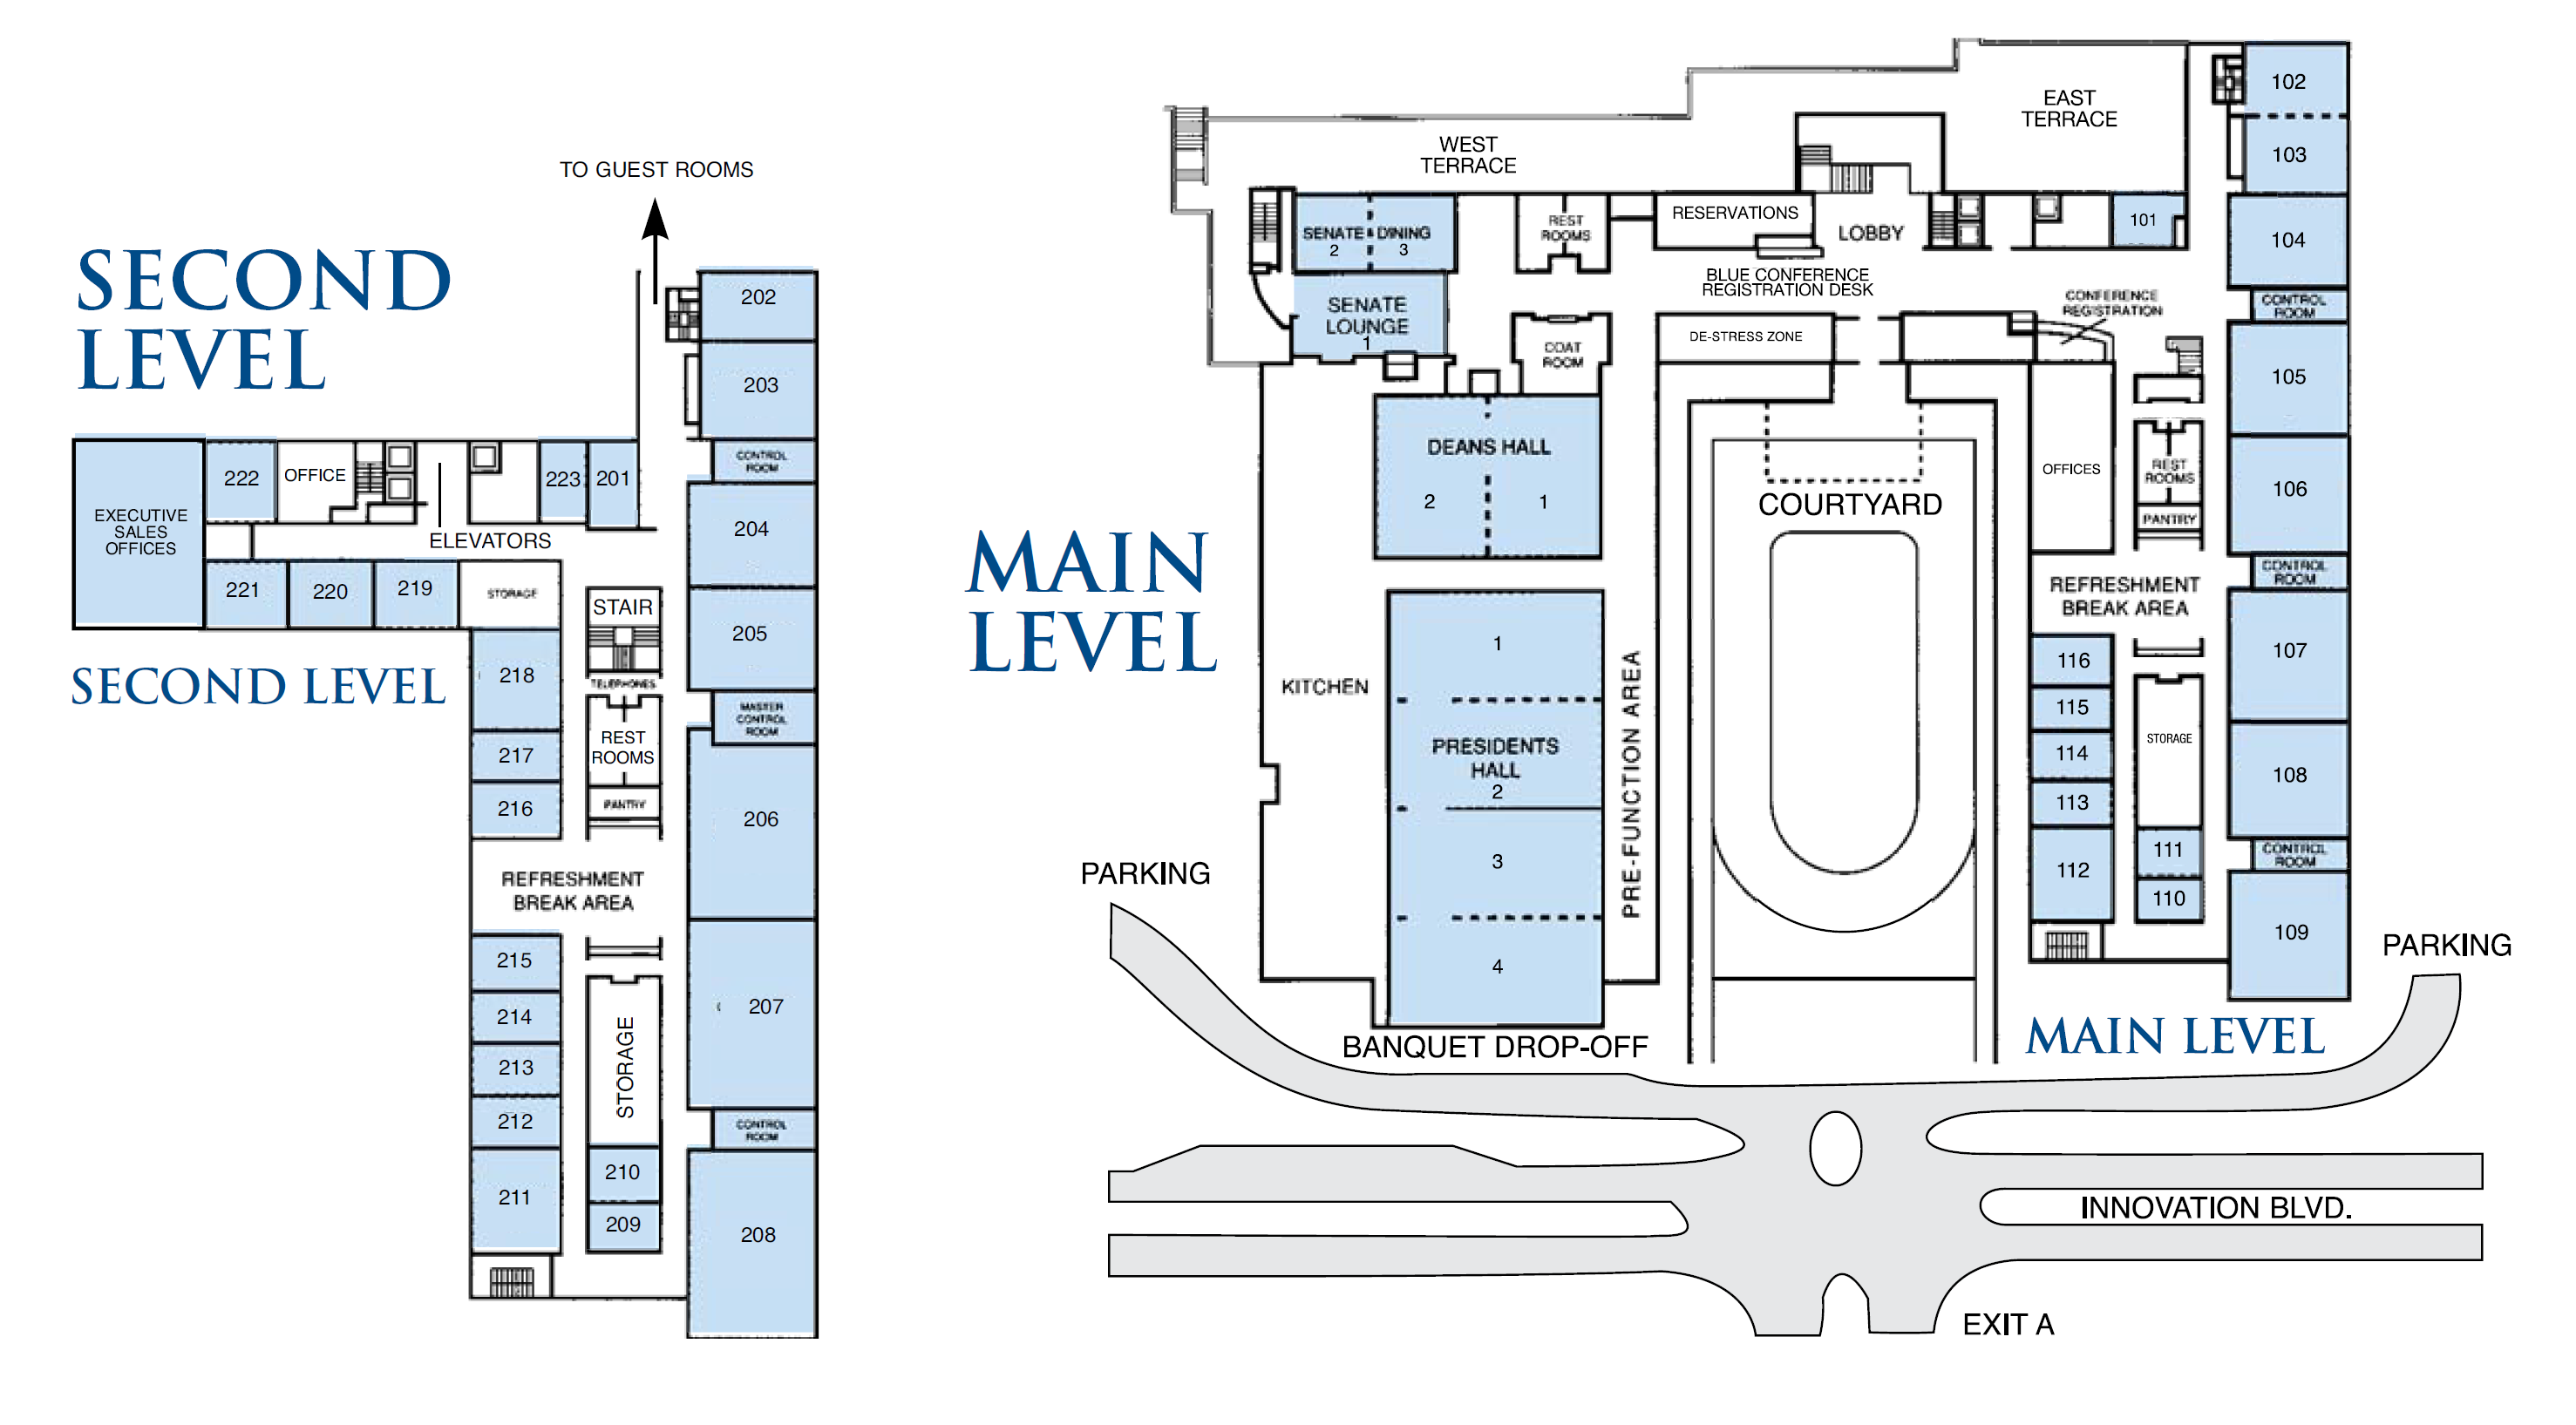 Map of the Penn Stater